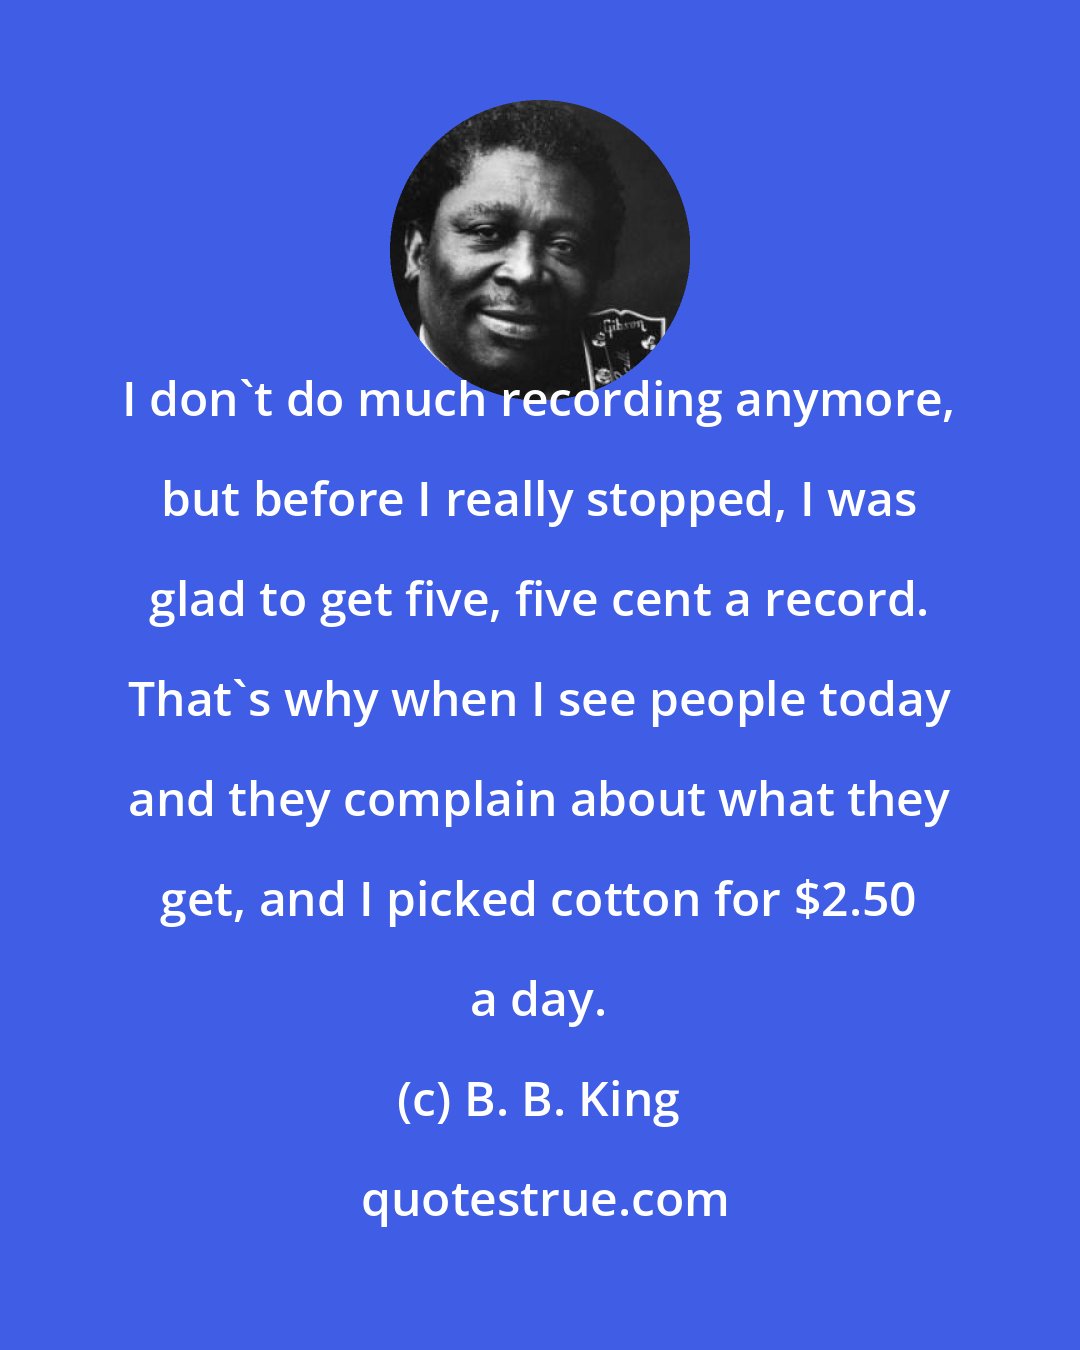 B. B. King: I don't do much recording anymore, but before I really stopped, I was glad to get five, five cent a record. That's why when I see people today and they complain about what they get, and I picked cotton for $2.50 a day.